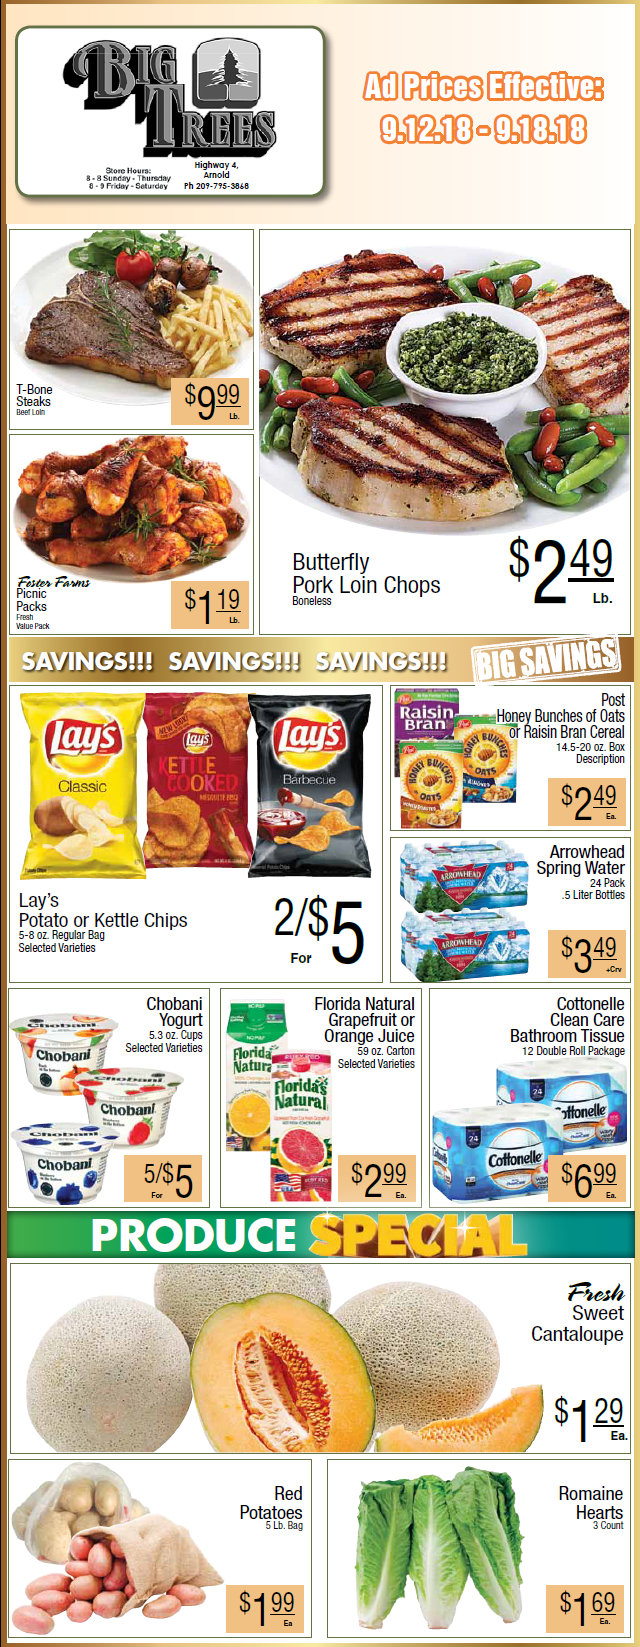 Big Trees Market Weekly Ad & Grocery Specials Through September 18th